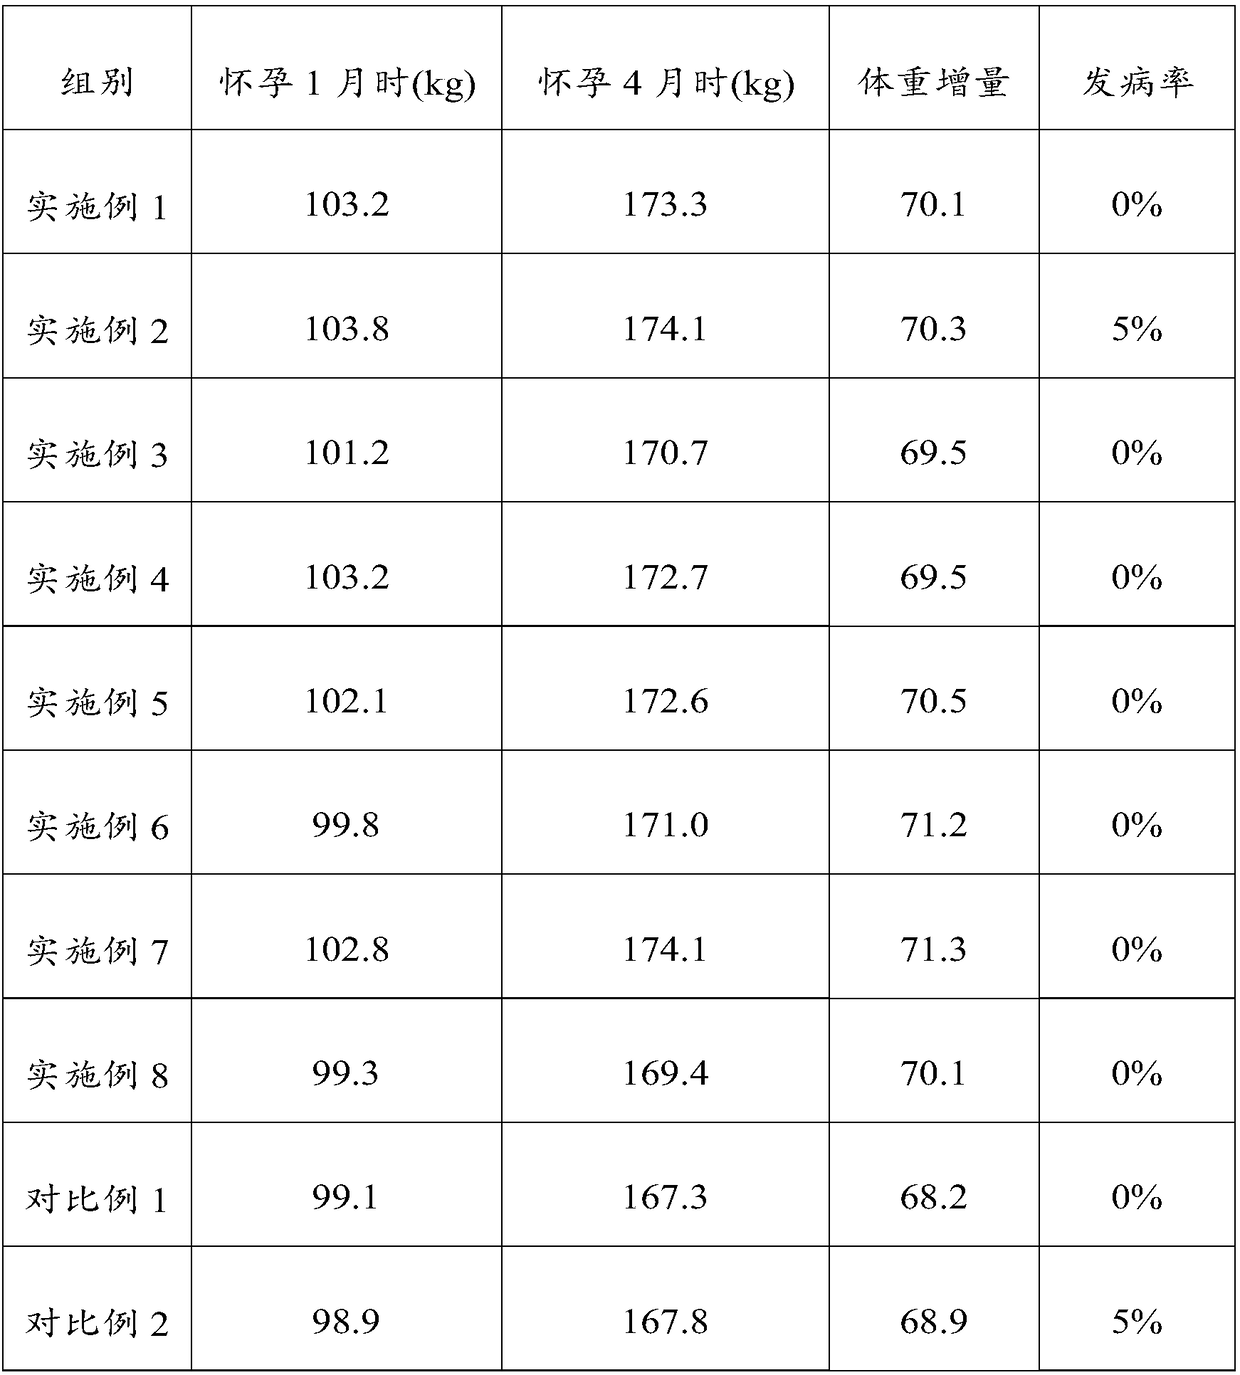 Feed for sows during pregnancy period and preparation method of feed